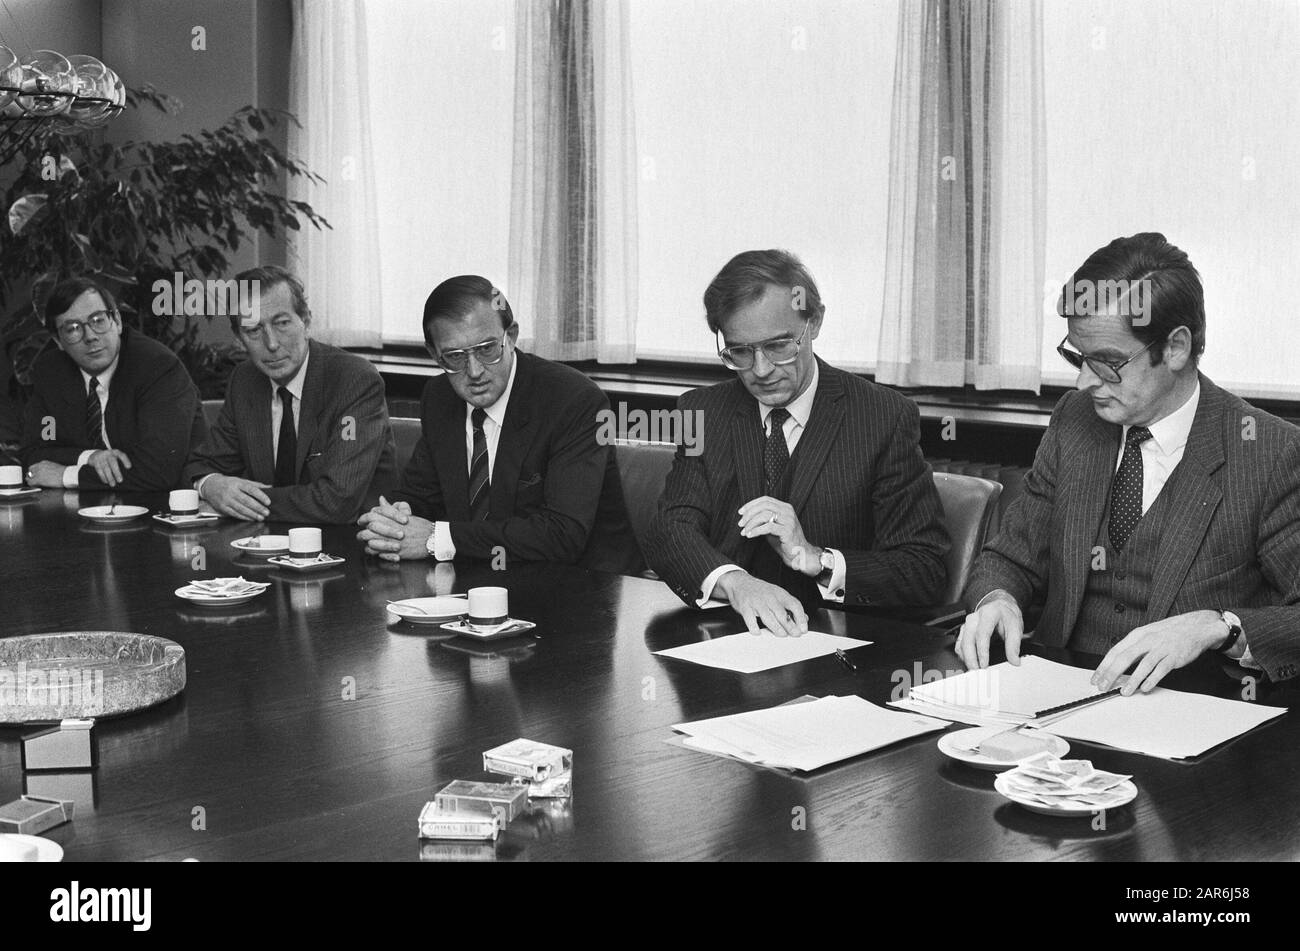 Minister Ruding (middle) signed in Rotterdam the founding act of the Postbank  Minister Ruding studies documents Date: 31 December 1985 Location: Rotterdam, Zuid-Holland Keywords: banks, banking, ministers, foundation Personal name: Ruding, Onno Stock Photo